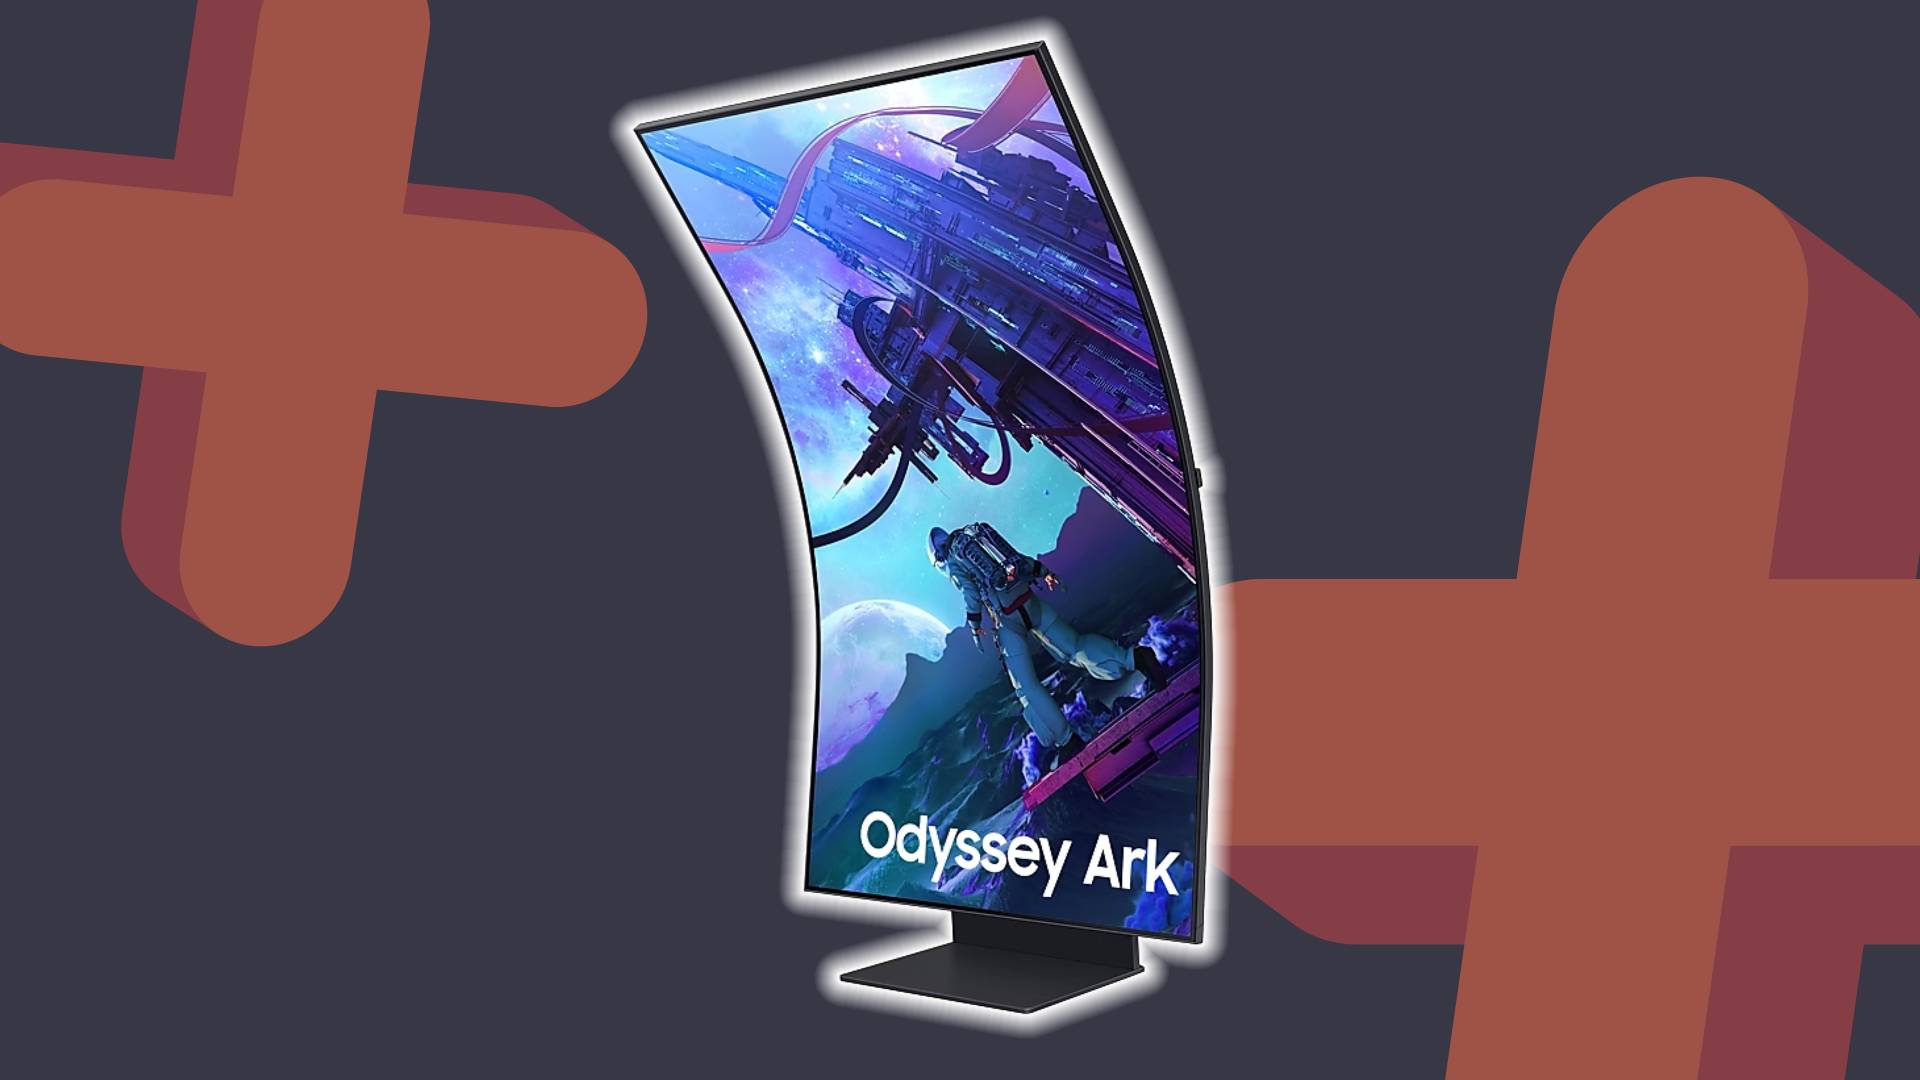 Samsung's monster monitor Odyssey Ark proved to be too much for me